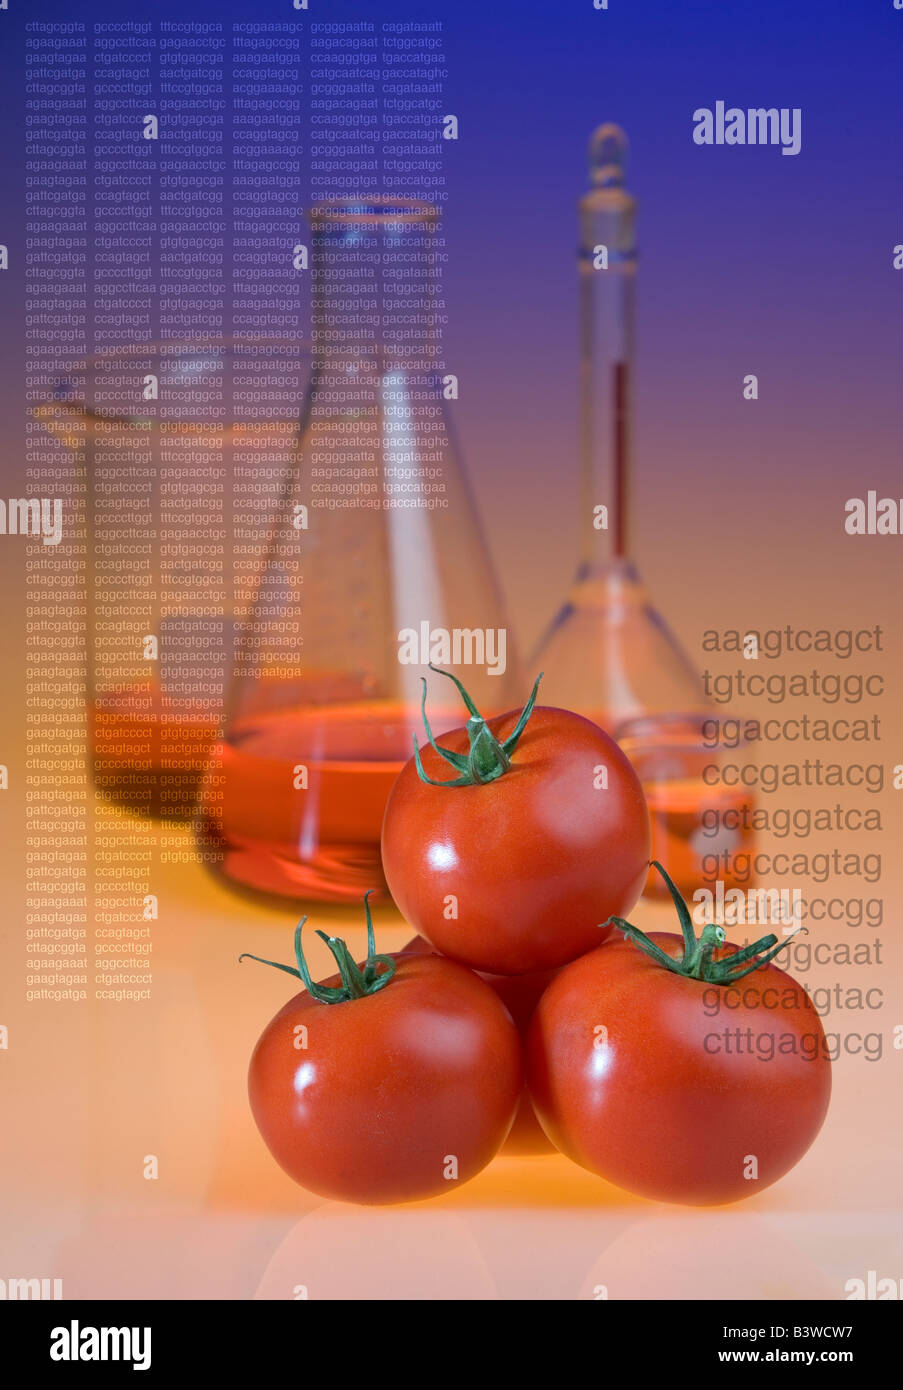 Concept shot of genetically modified tomatoes showing beakers and DNA sequence codes Genetically modified foods resist rot. Stock Photo